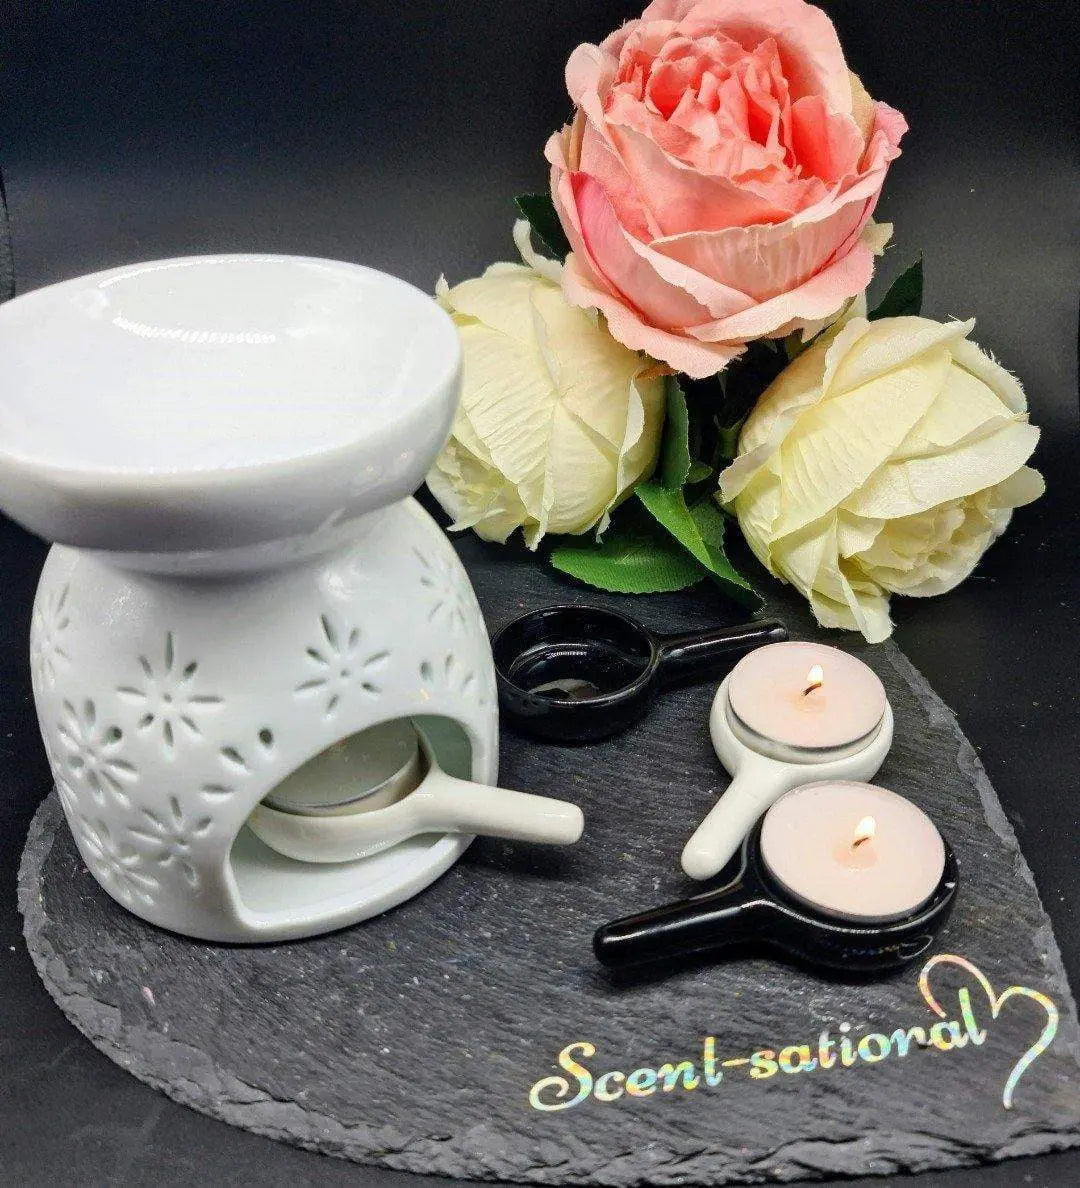 Wax Burner Candle spoon for Tea Lights Scent Sational Wax melts